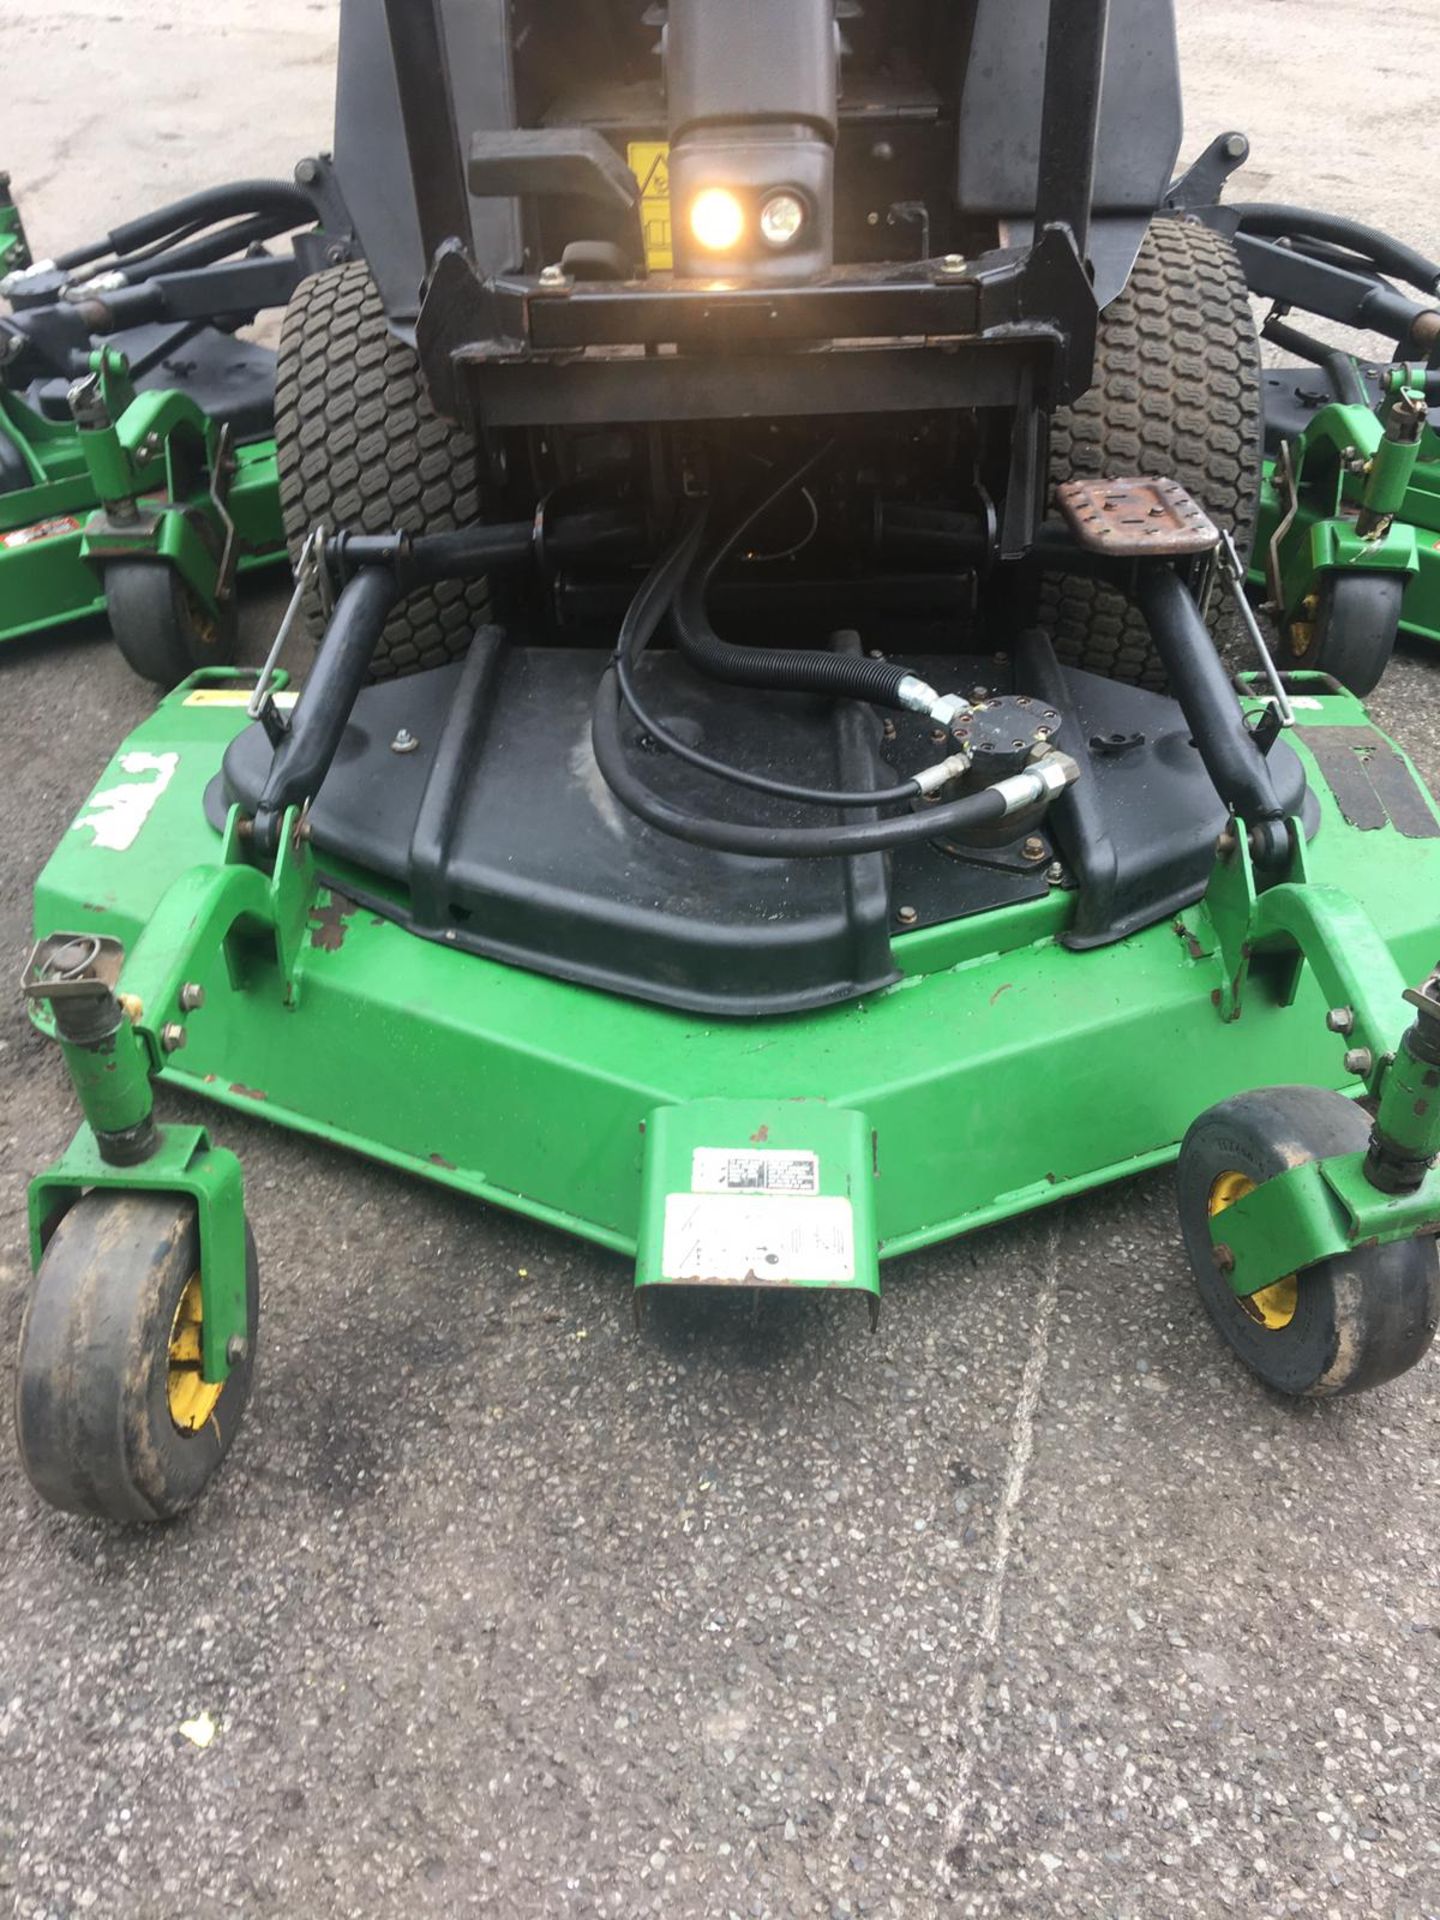 JOHN DEERE 1600 WIDE AREA TURBO BATWING RIDE ON LAWN MOWER, CRUISE CONTROL, RUNS & WORKS *NO VAT* - Image 6 of 24